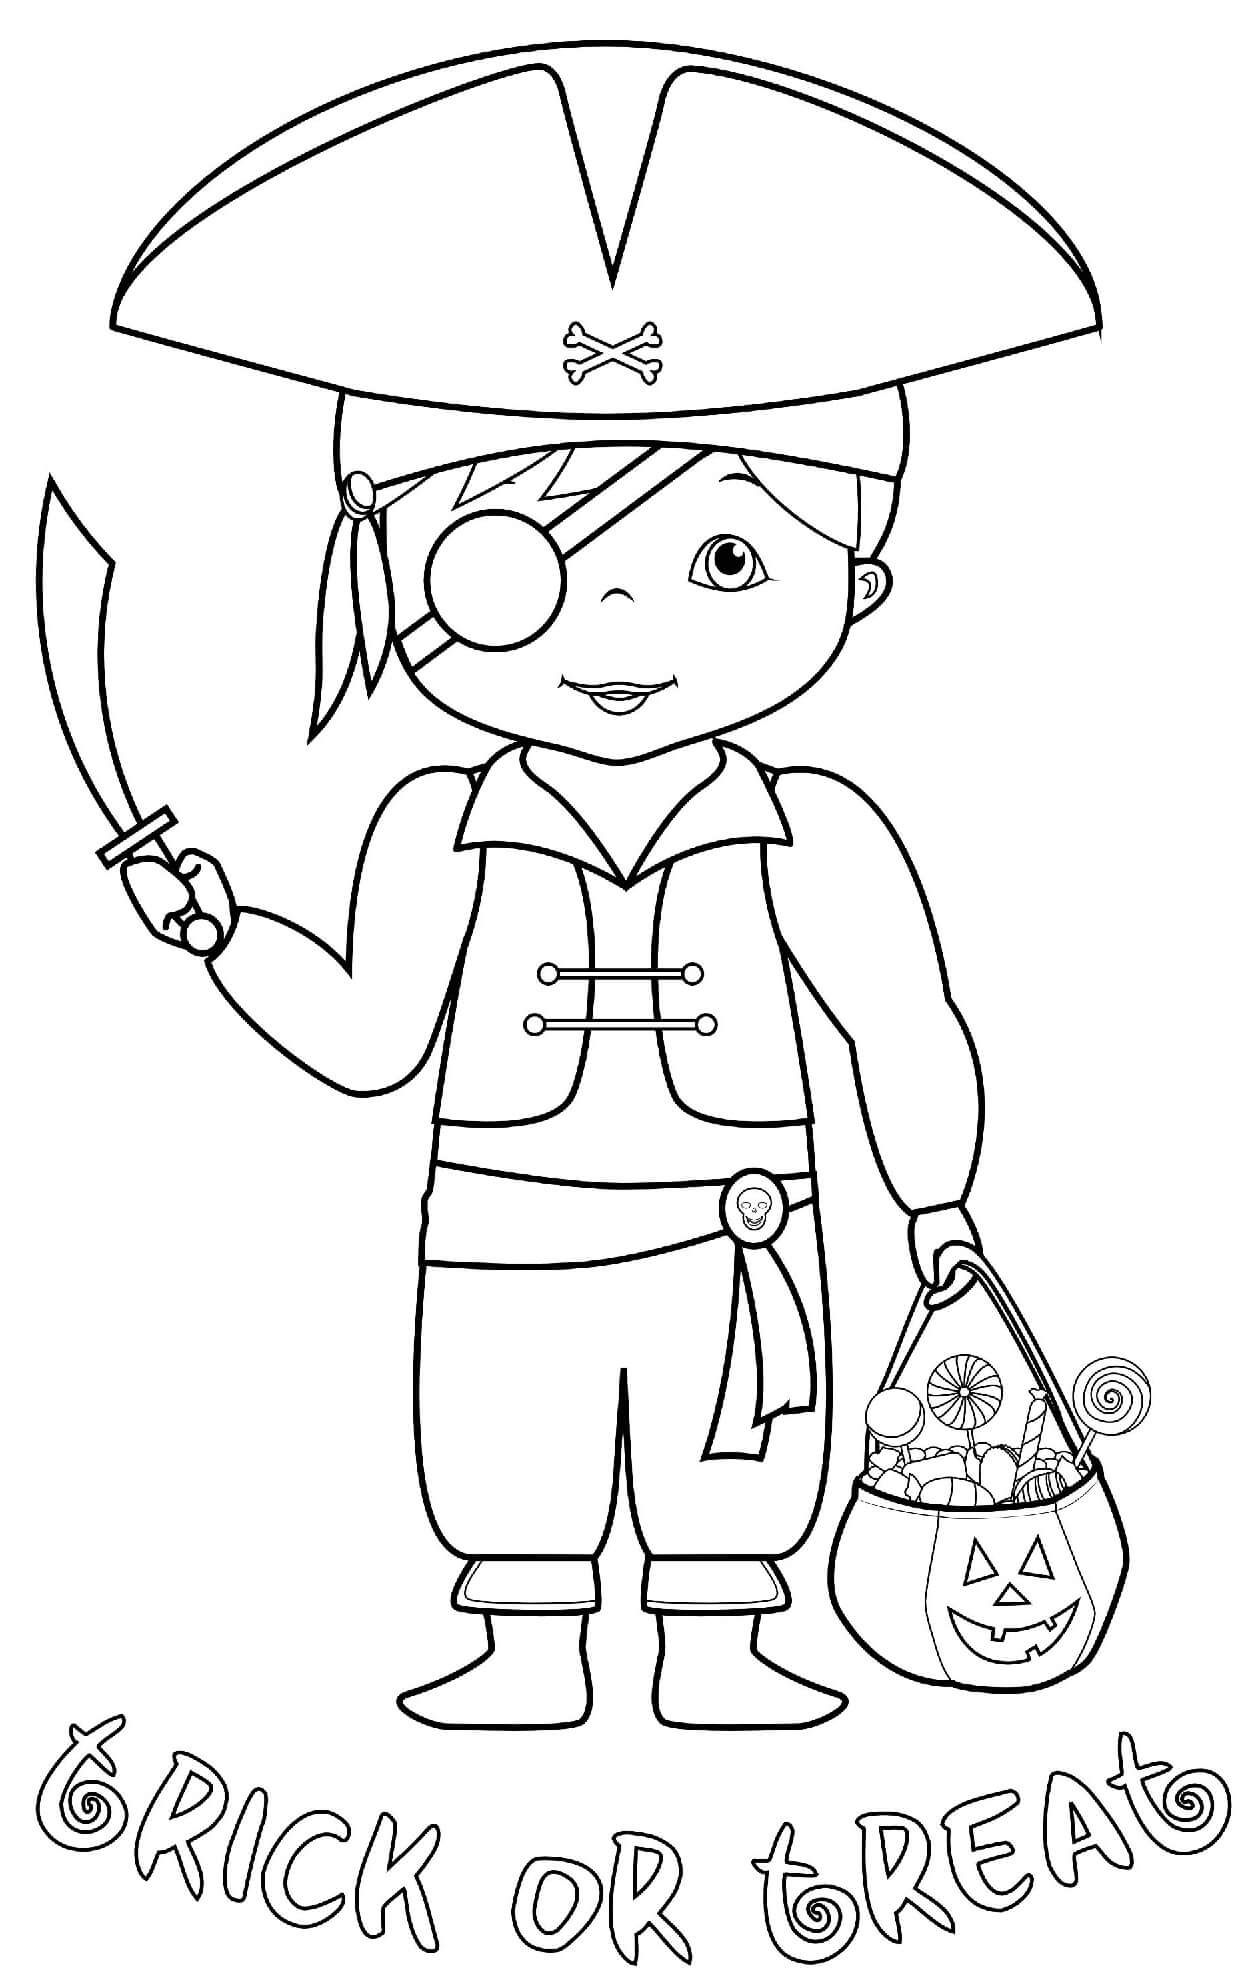 Halloween Pirate Trick Treat Costume Coloring Page